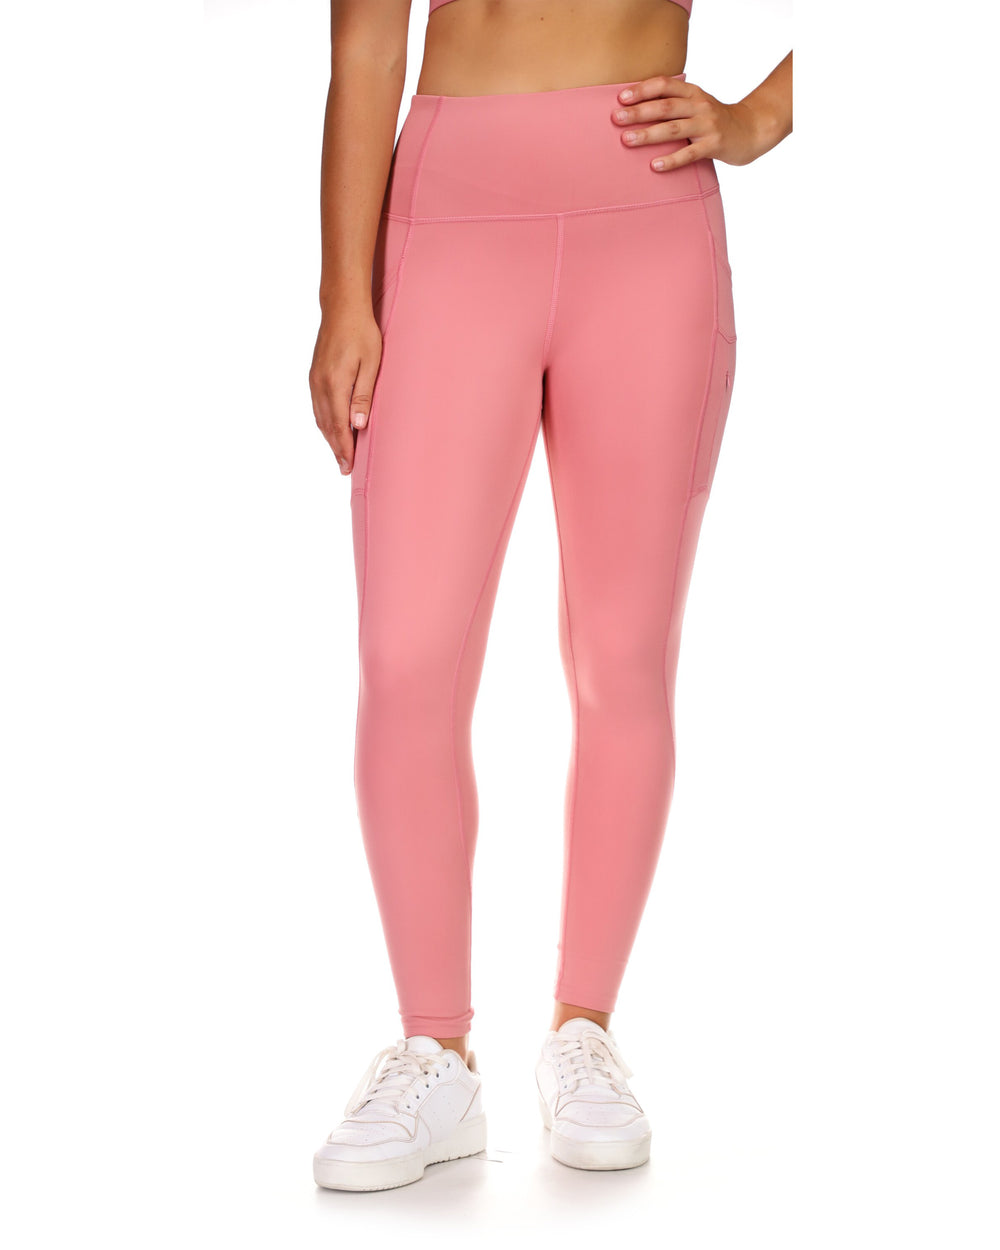 womens sports leggings for Glyder Leggings Clay Pink Size Small